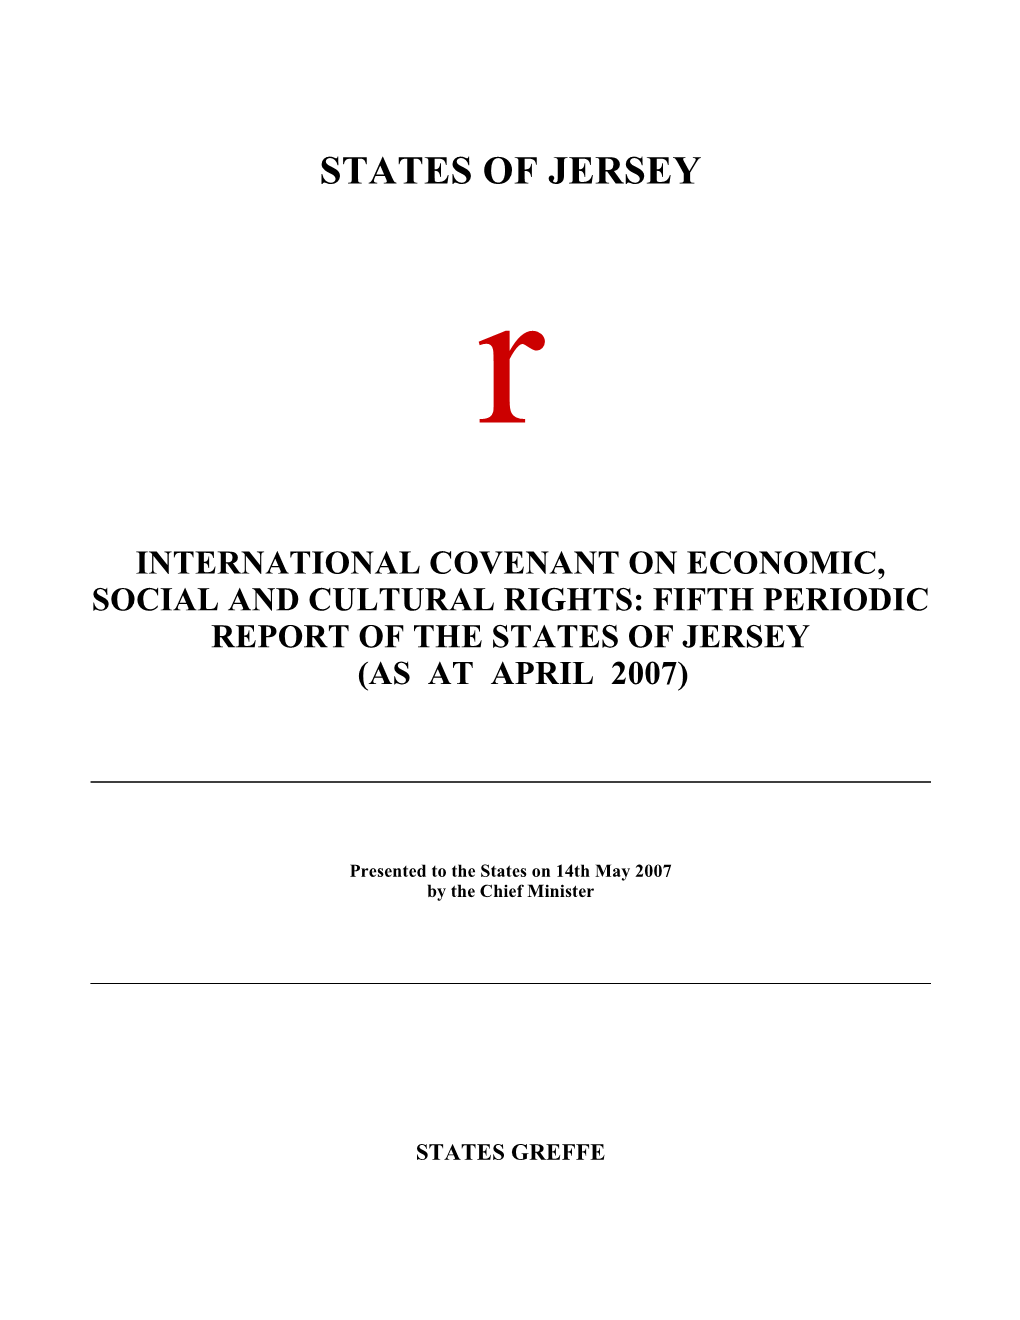 Fifth Periodic Report of the States of Jersey (As at April 2007)